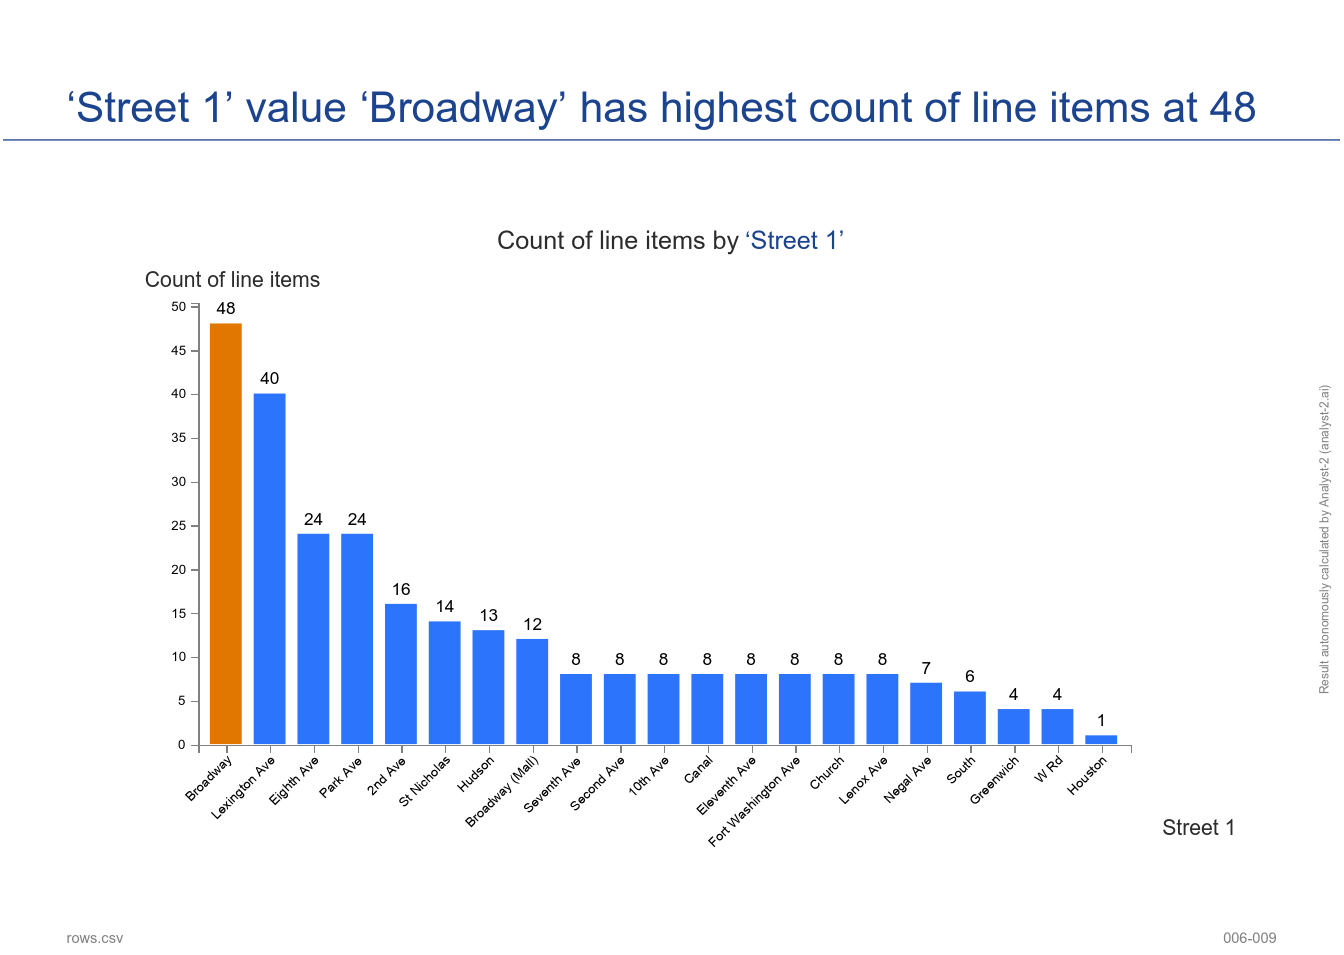 The ‘Street 1’ value ‘Broadway’ has the highest count of line items at 48. (MBPO Pedestrian Ramp Report - 006-009)